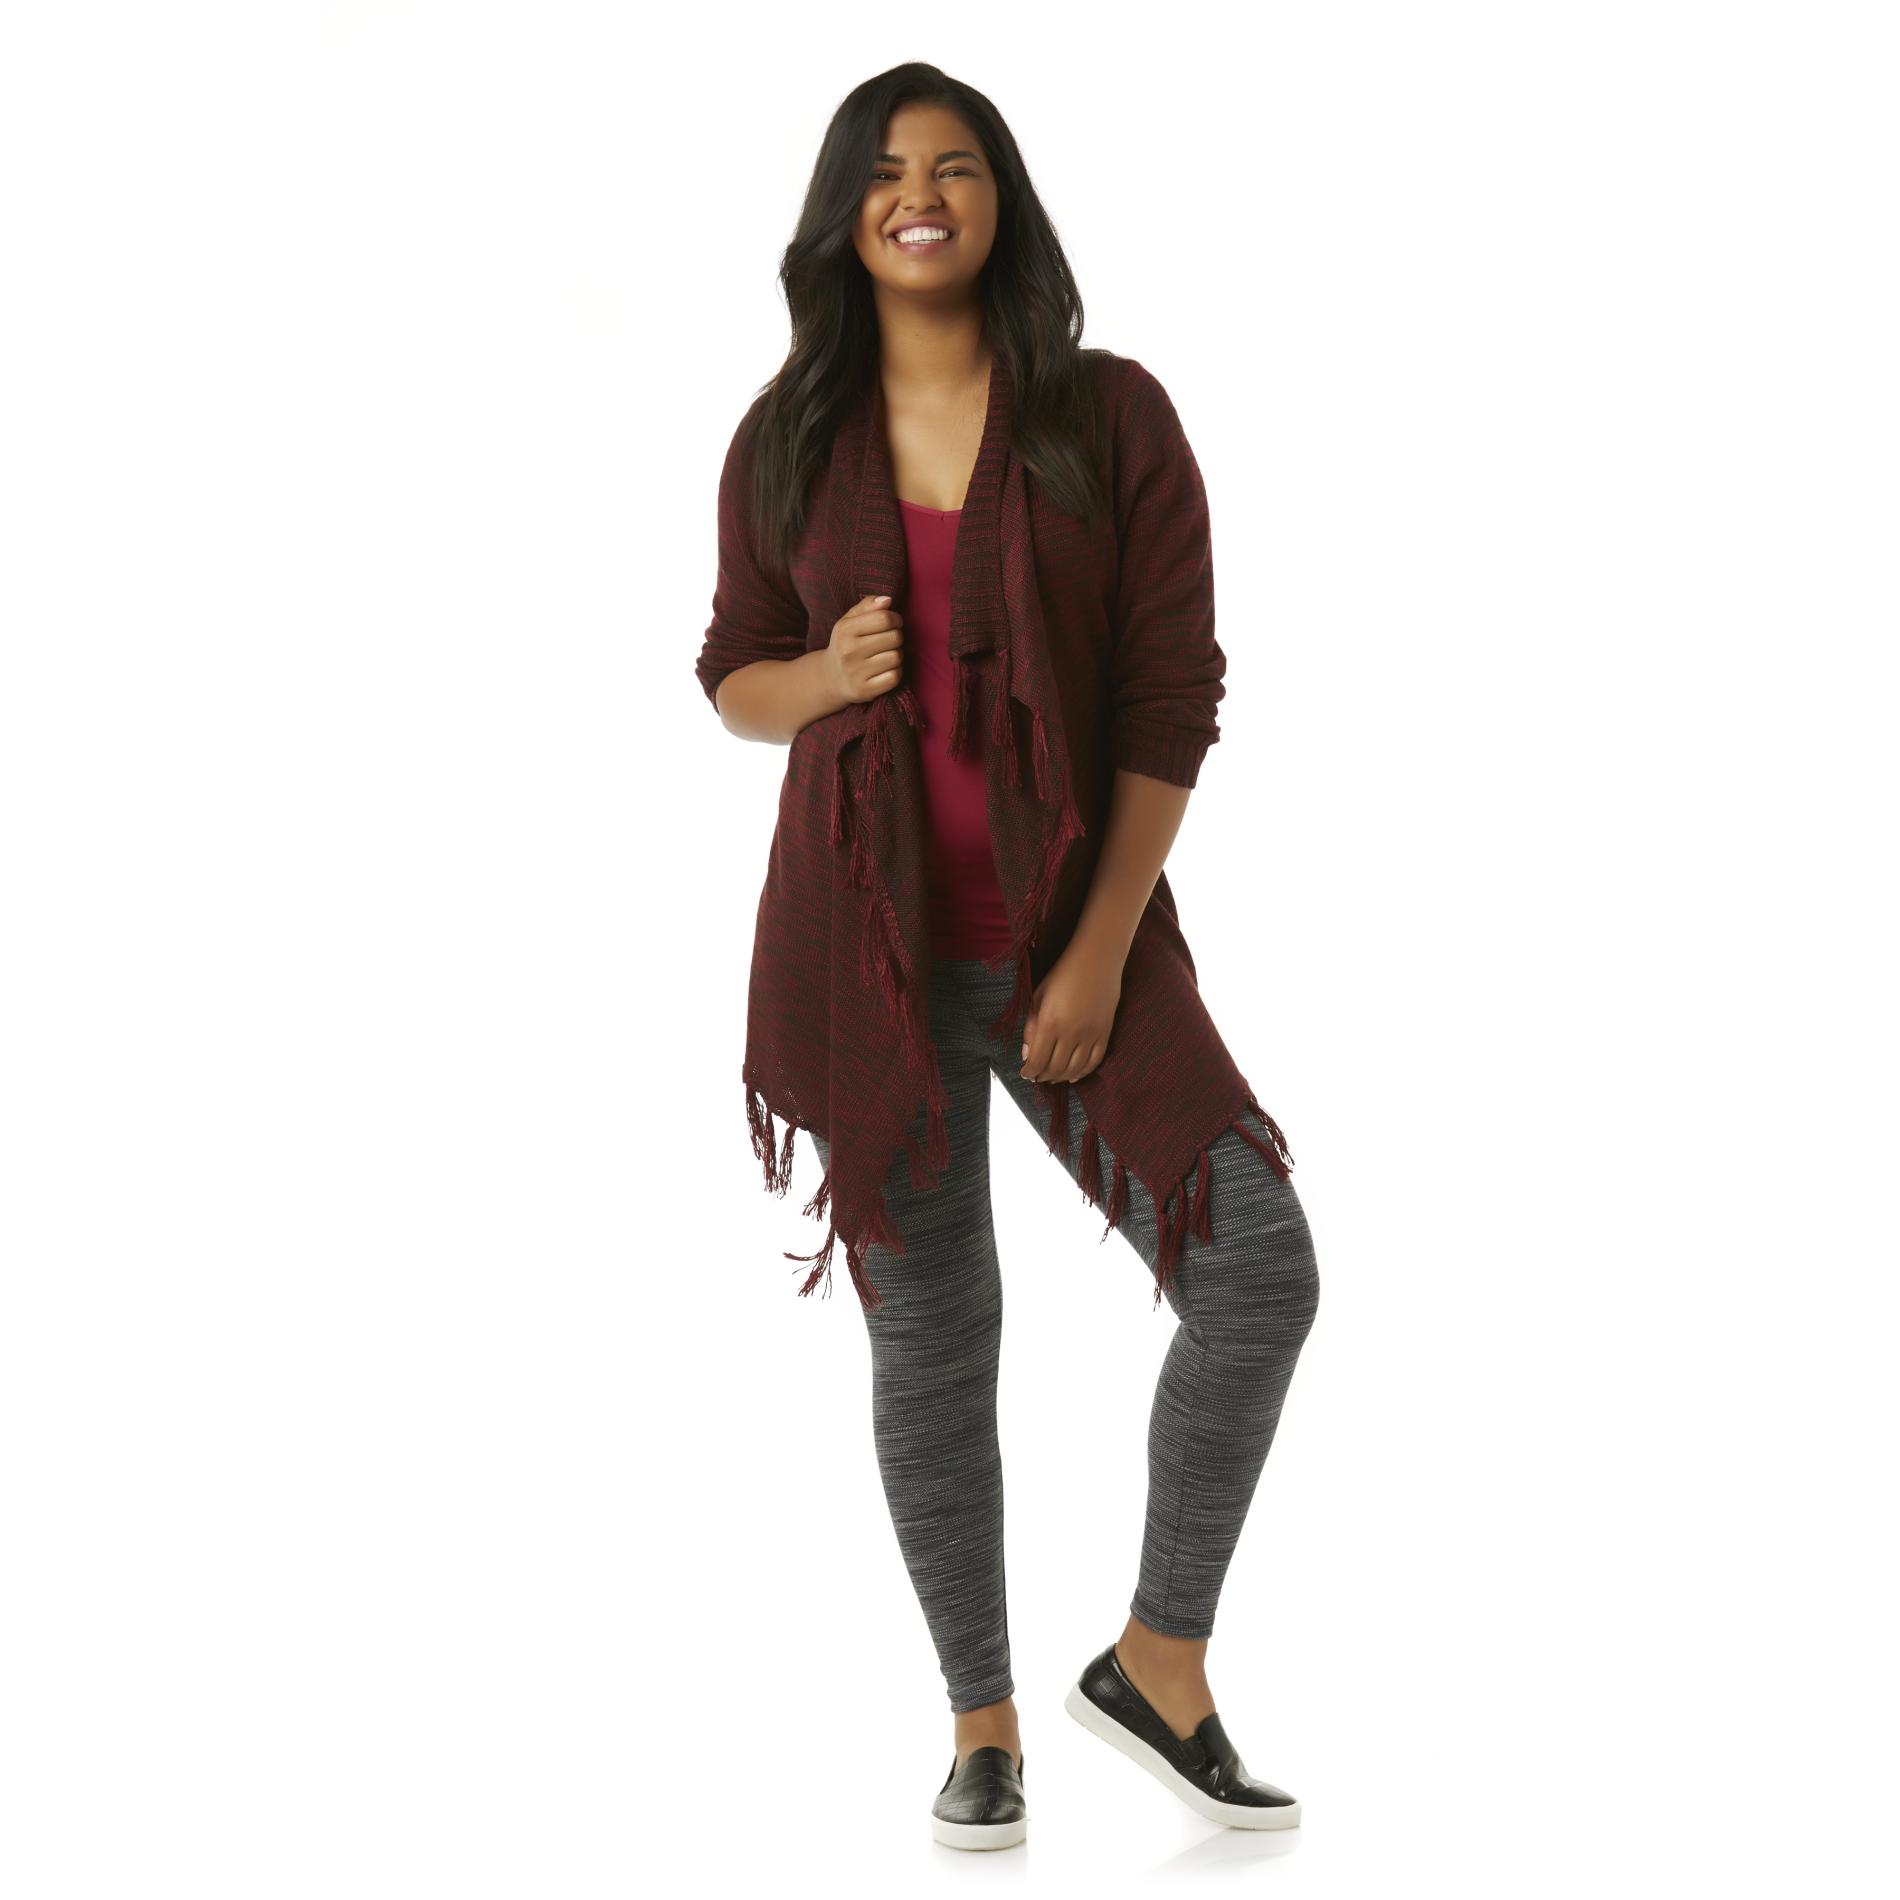 Simply Emma Women's Plus Open-Front Cardigan - Marled